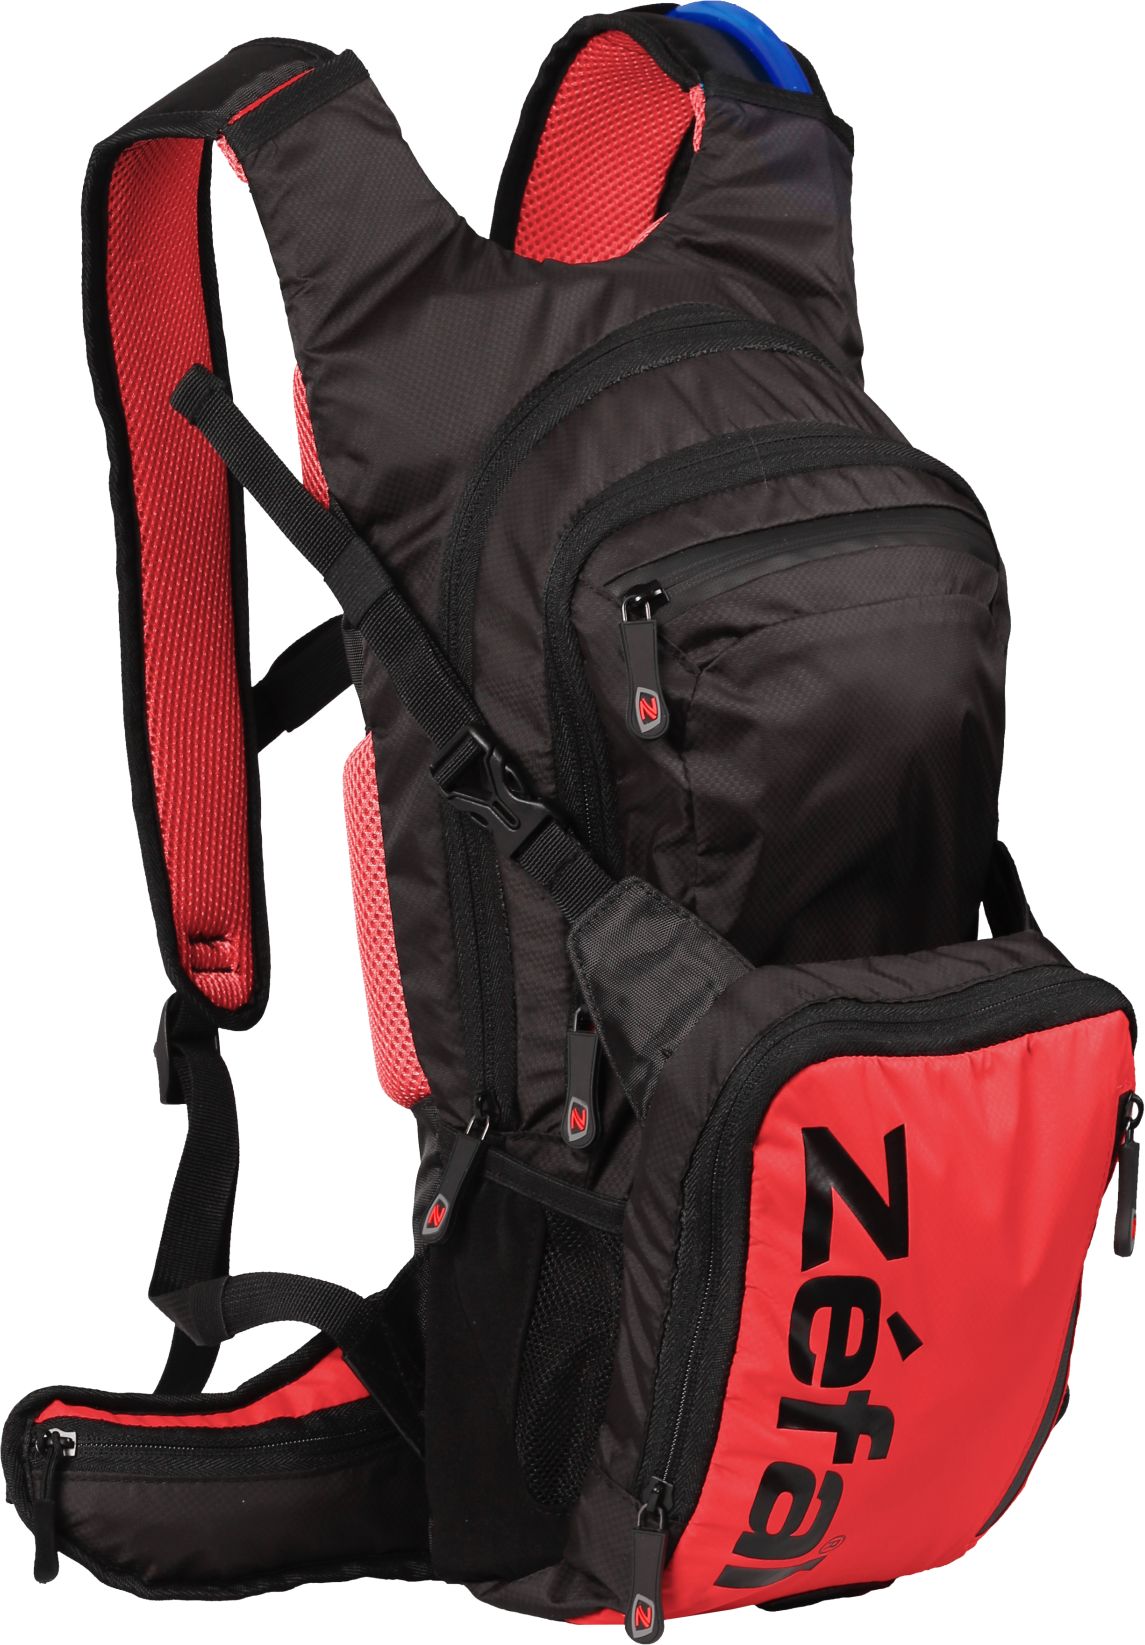 Zefal Z Hydro Enduro Hydration Backpack with Bladder 